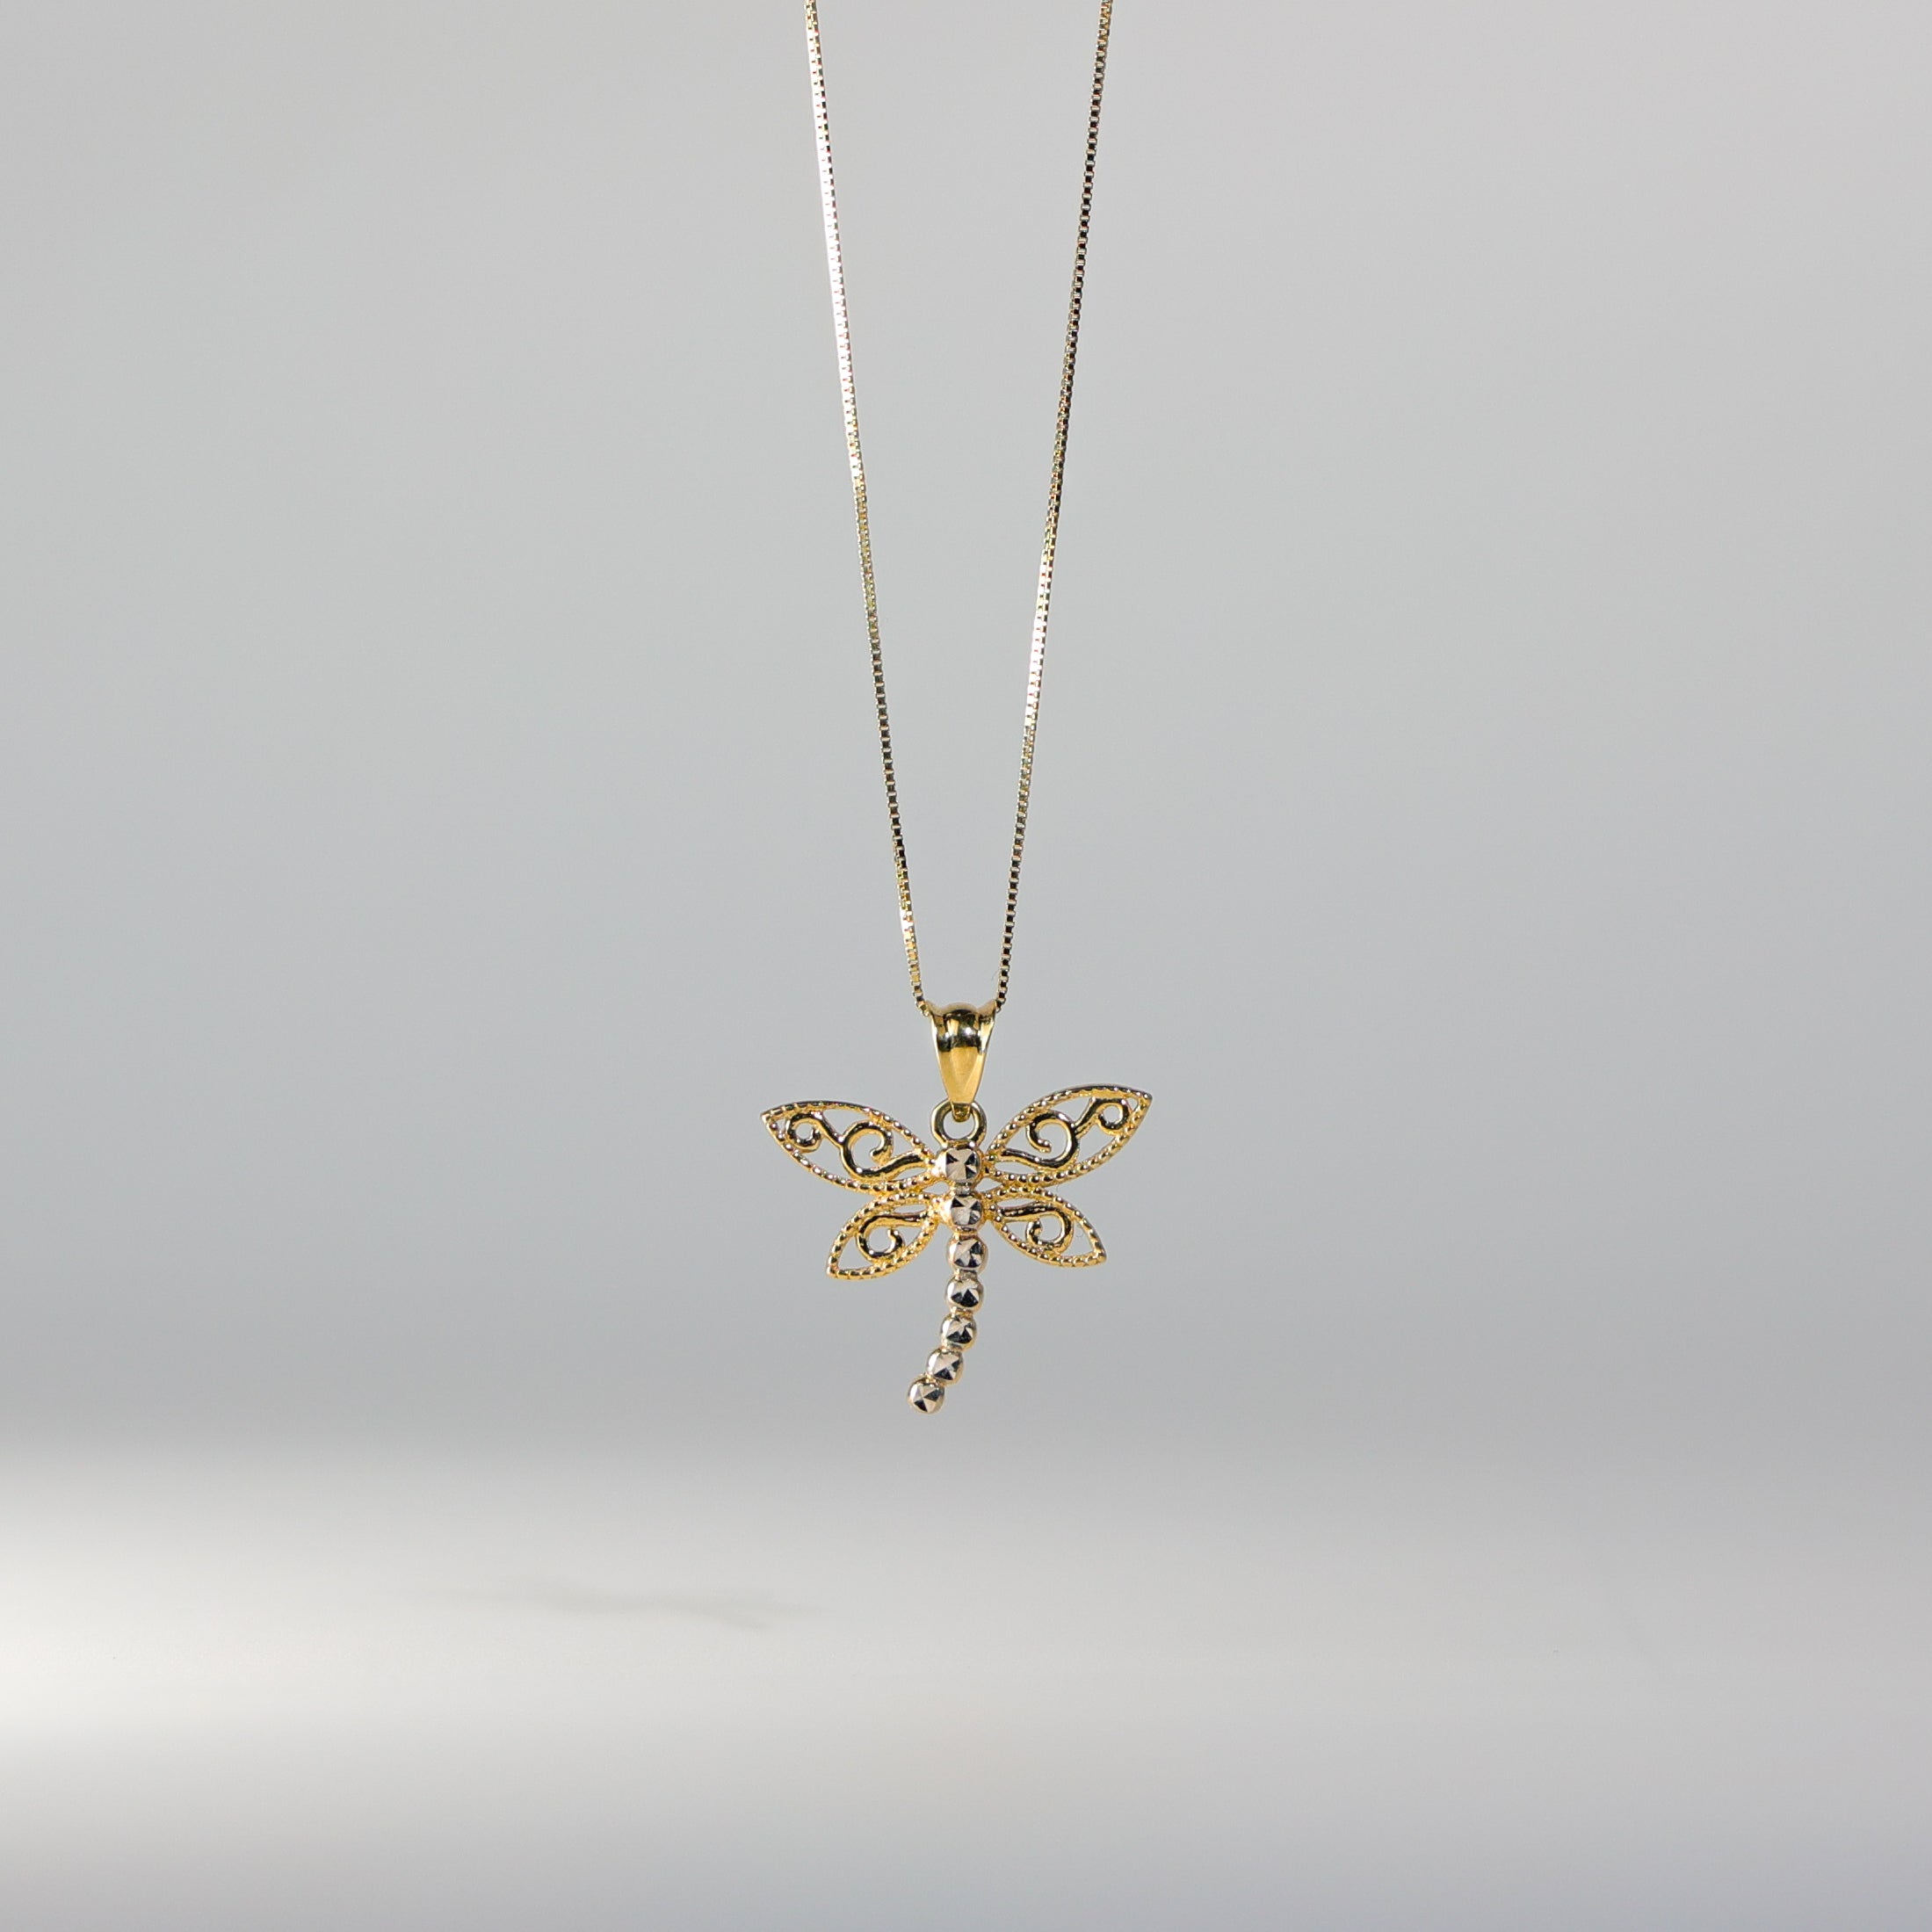 Gold Dragon Fly Heart Pendant Model-2359 - Charlie & Co. Jewelry